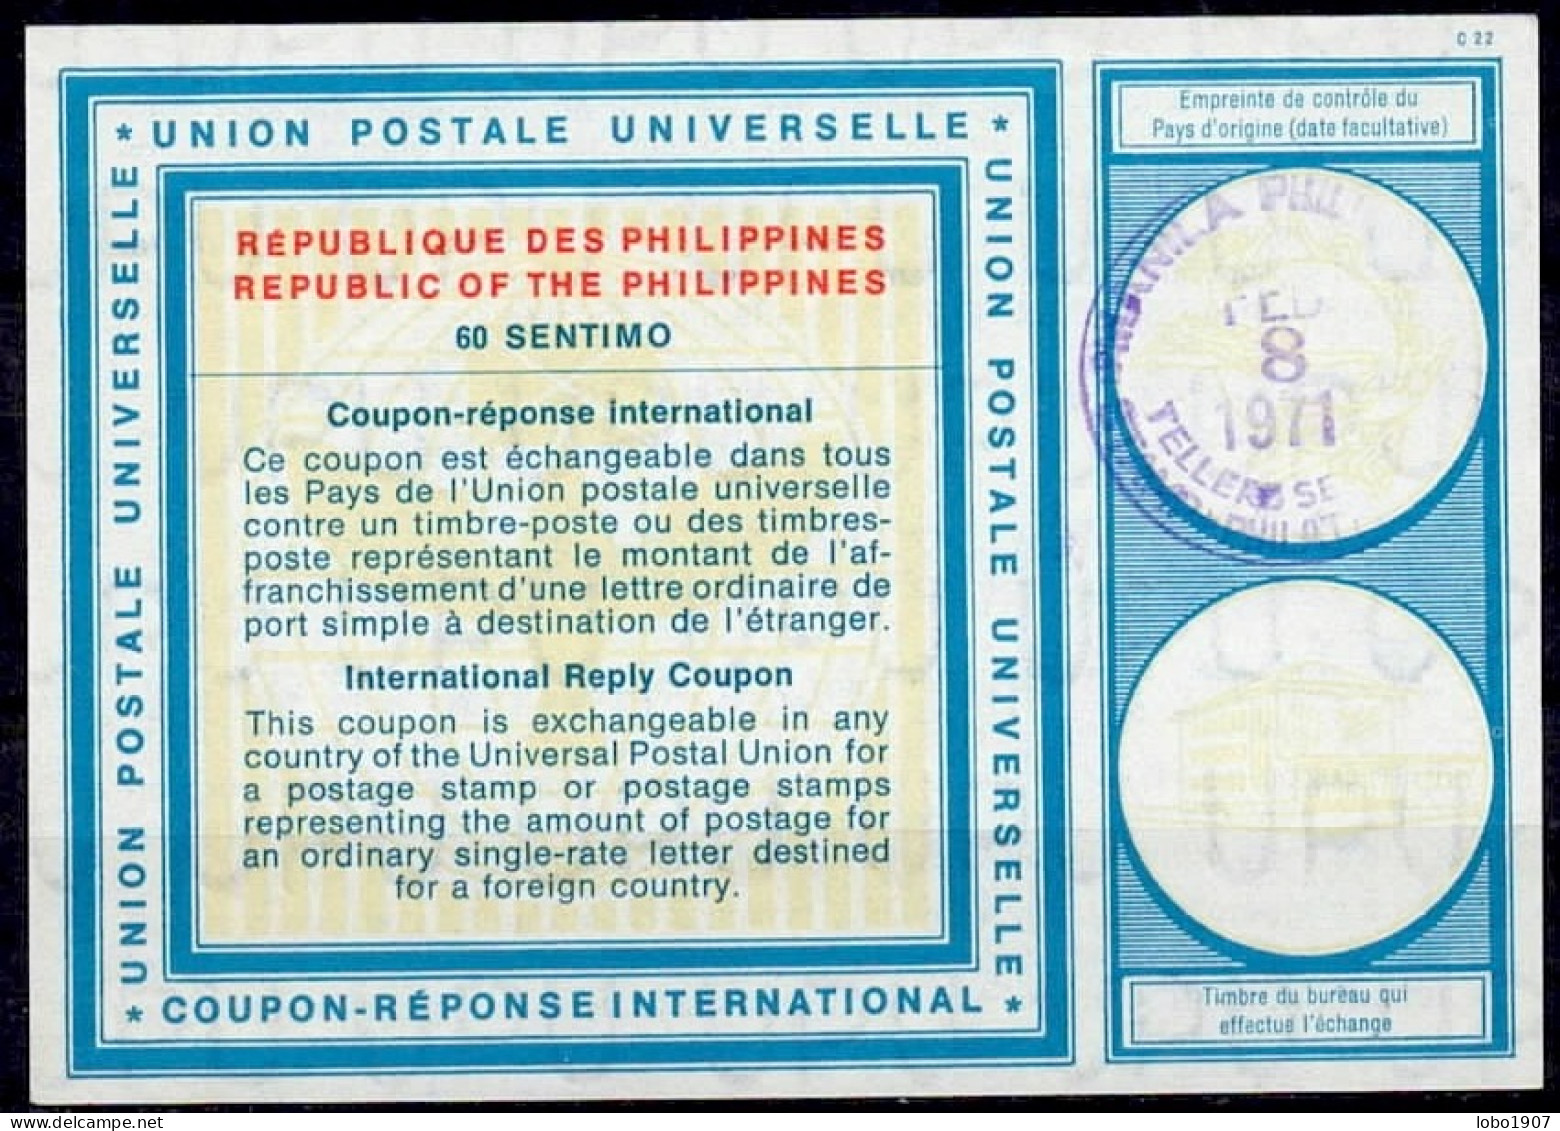 PHILIPPINES  Collection 15 International Reply Coupon Reponse Cupon Respuesta IRC IAS see list and scans